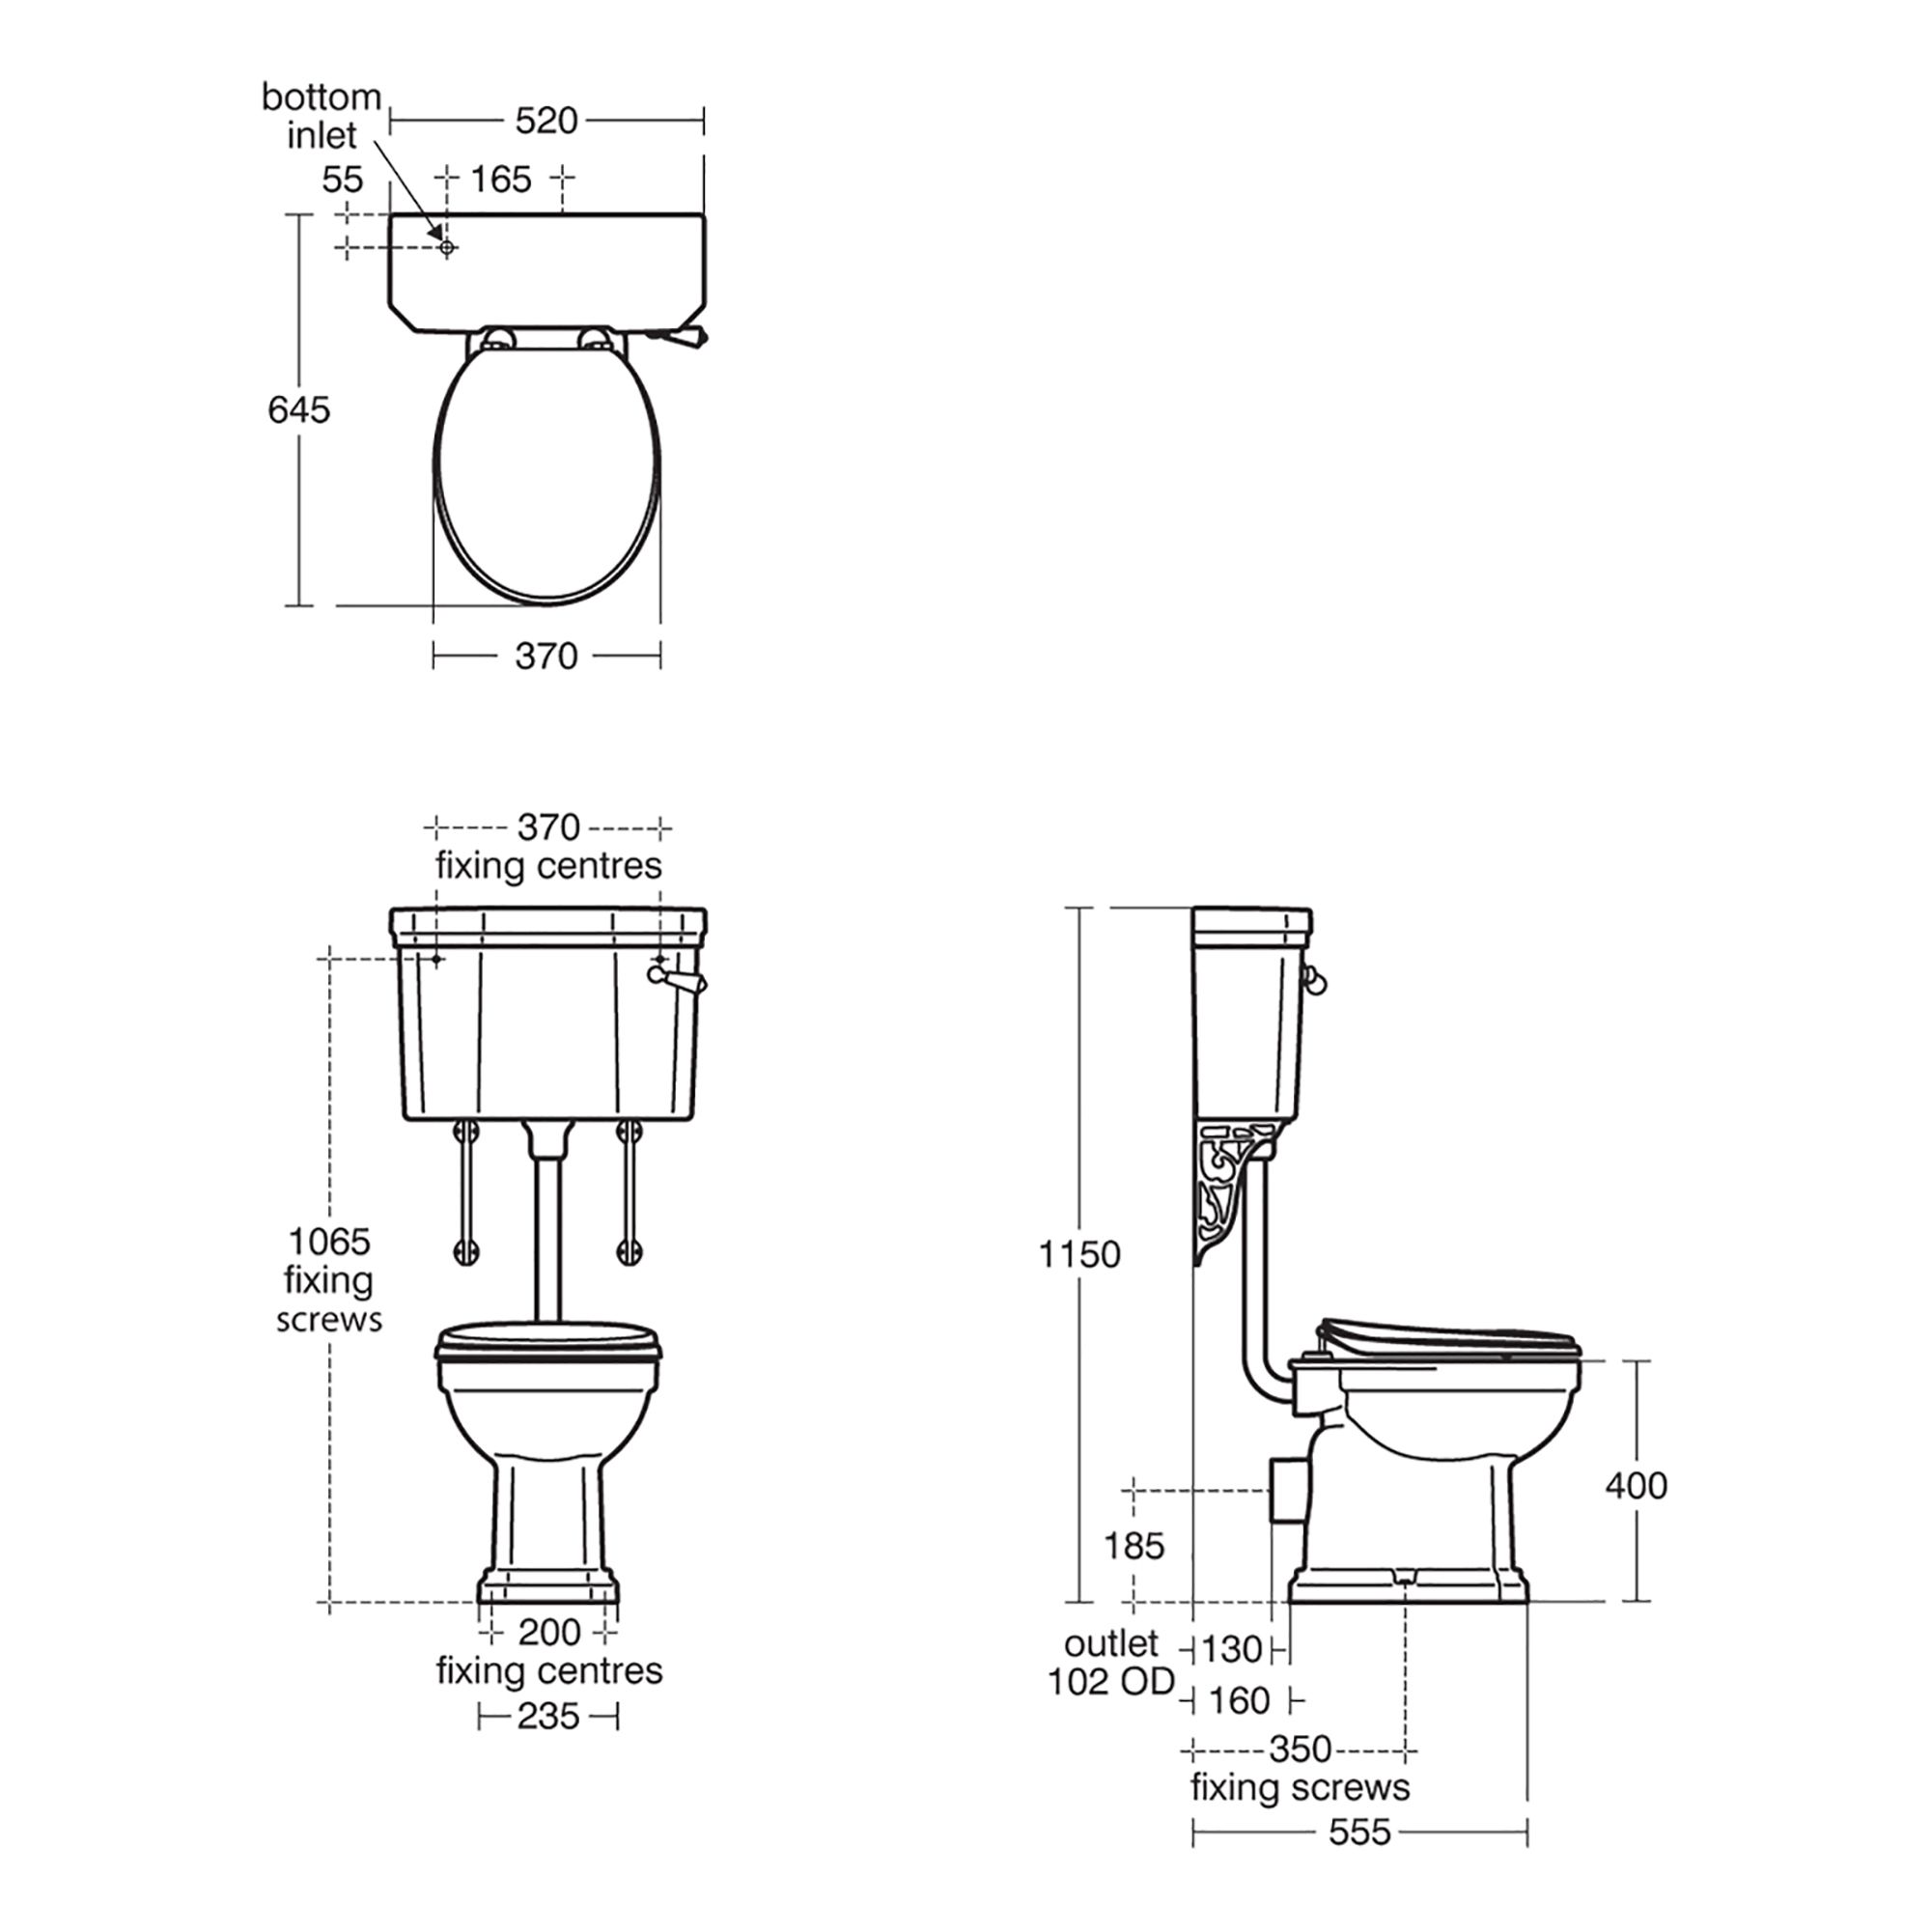 Ideal Standard Waverley Low Level White High-low Toilet & cistern with Standard close seat